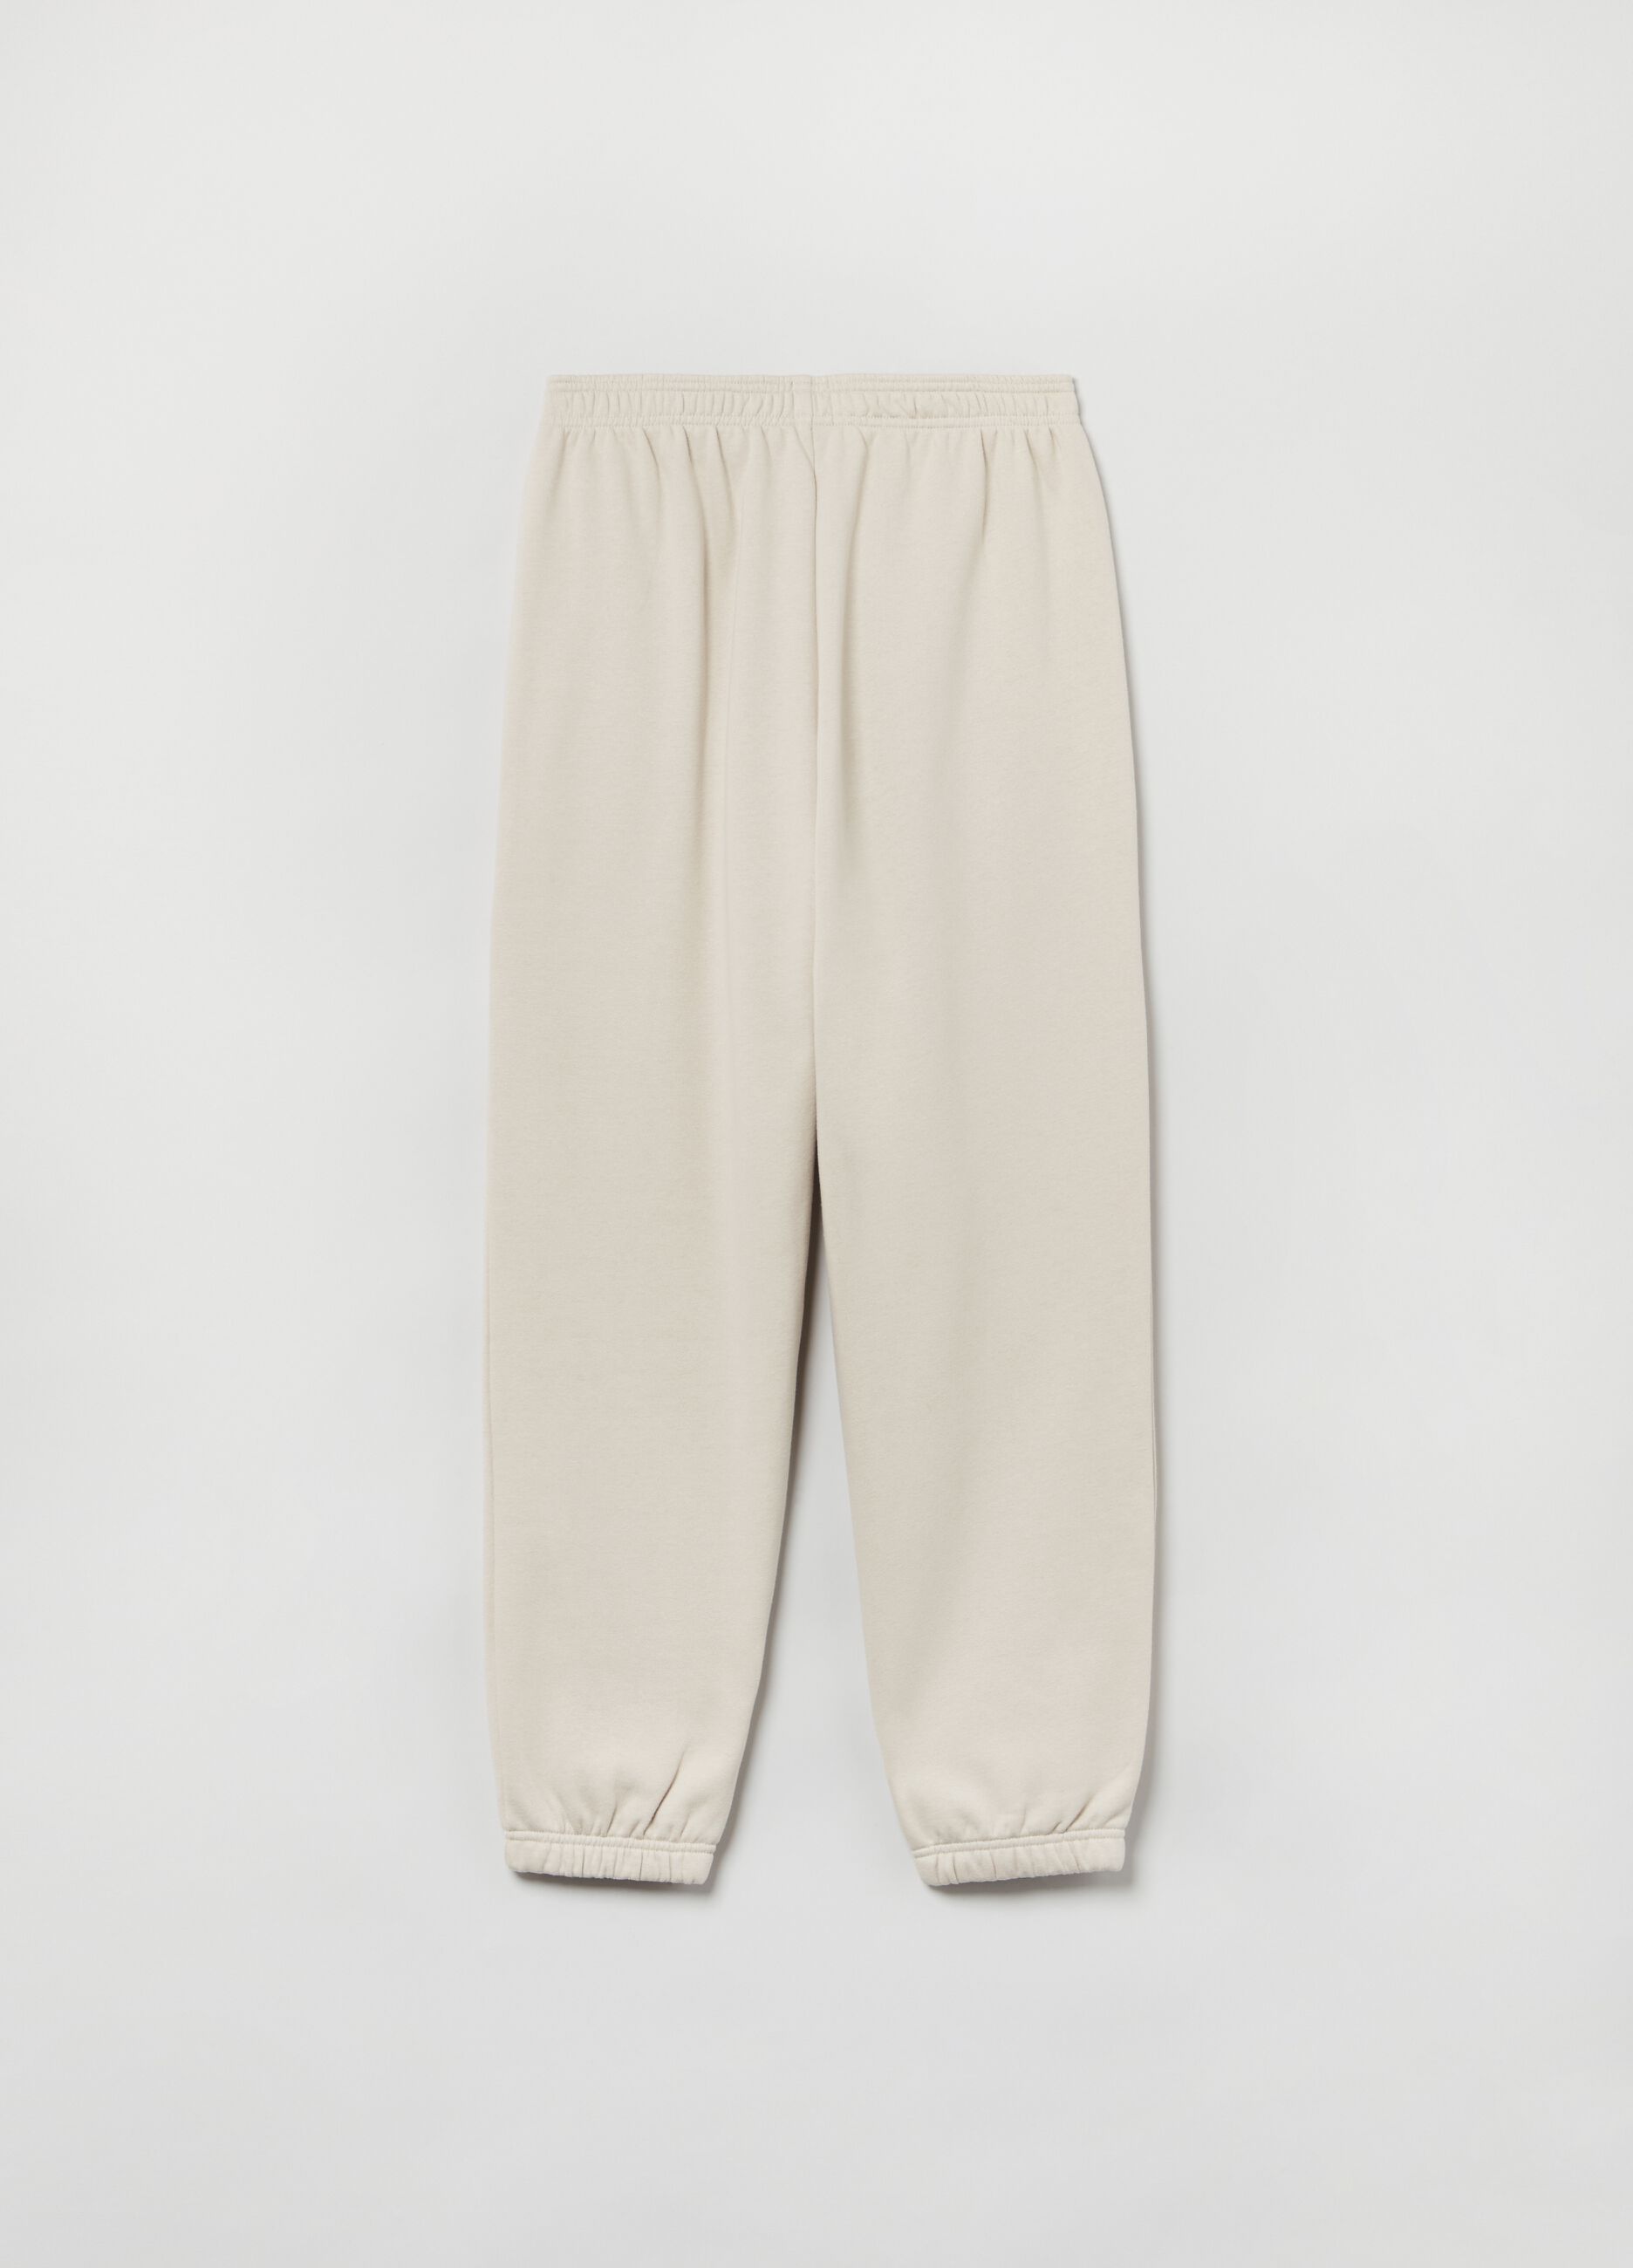 High-rise, easy-fit joggers in plush